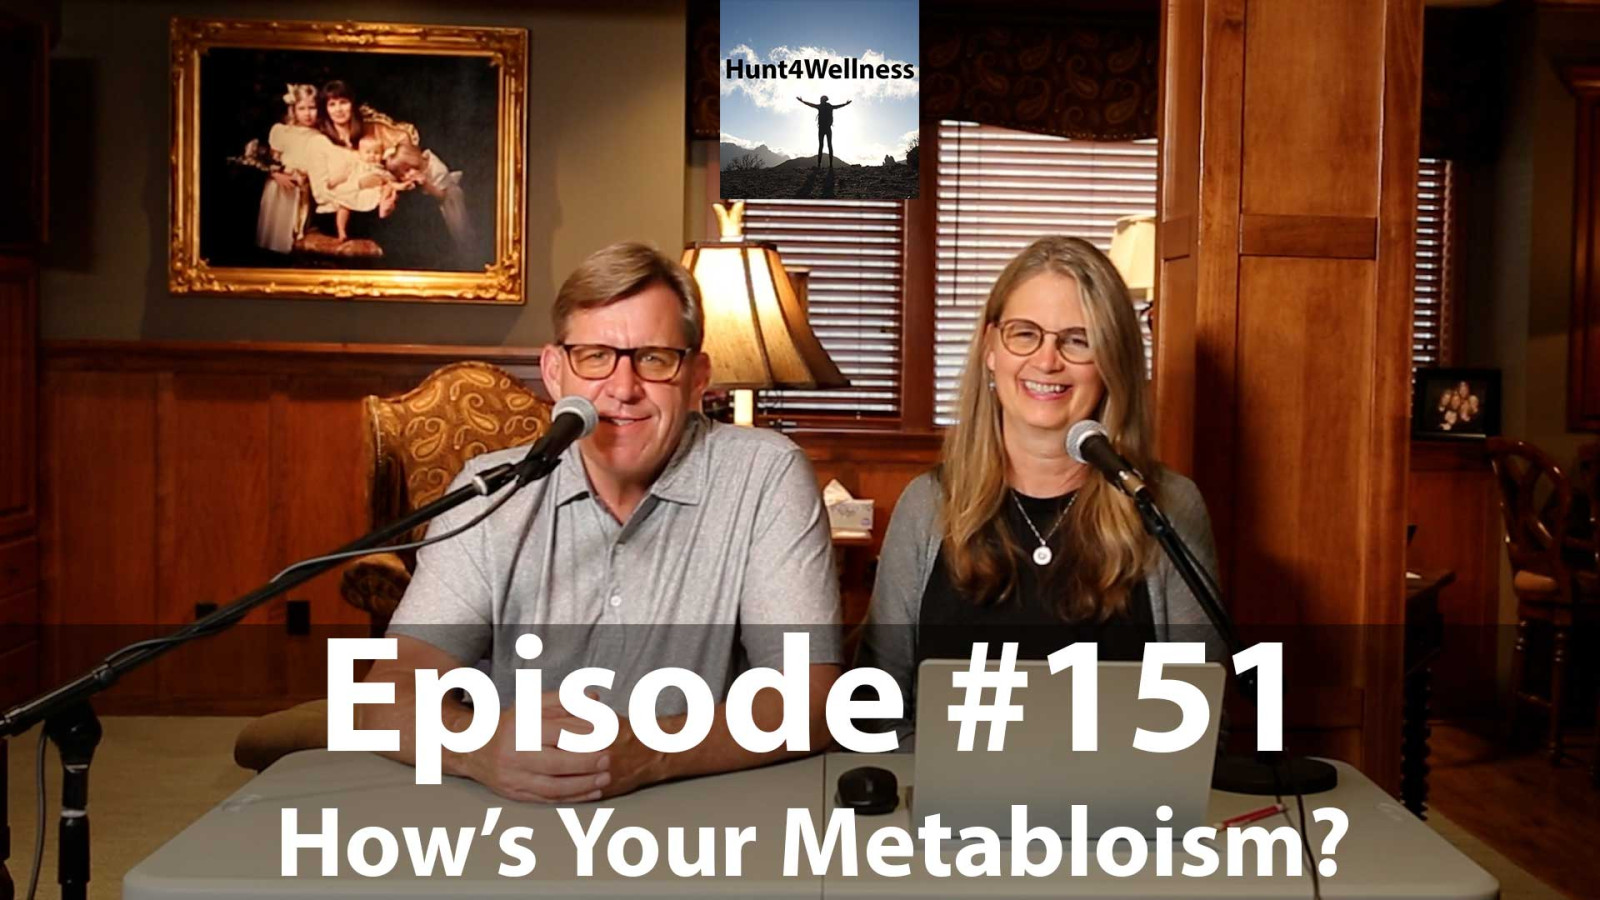 Episode #151 - How's Your Metabolism?